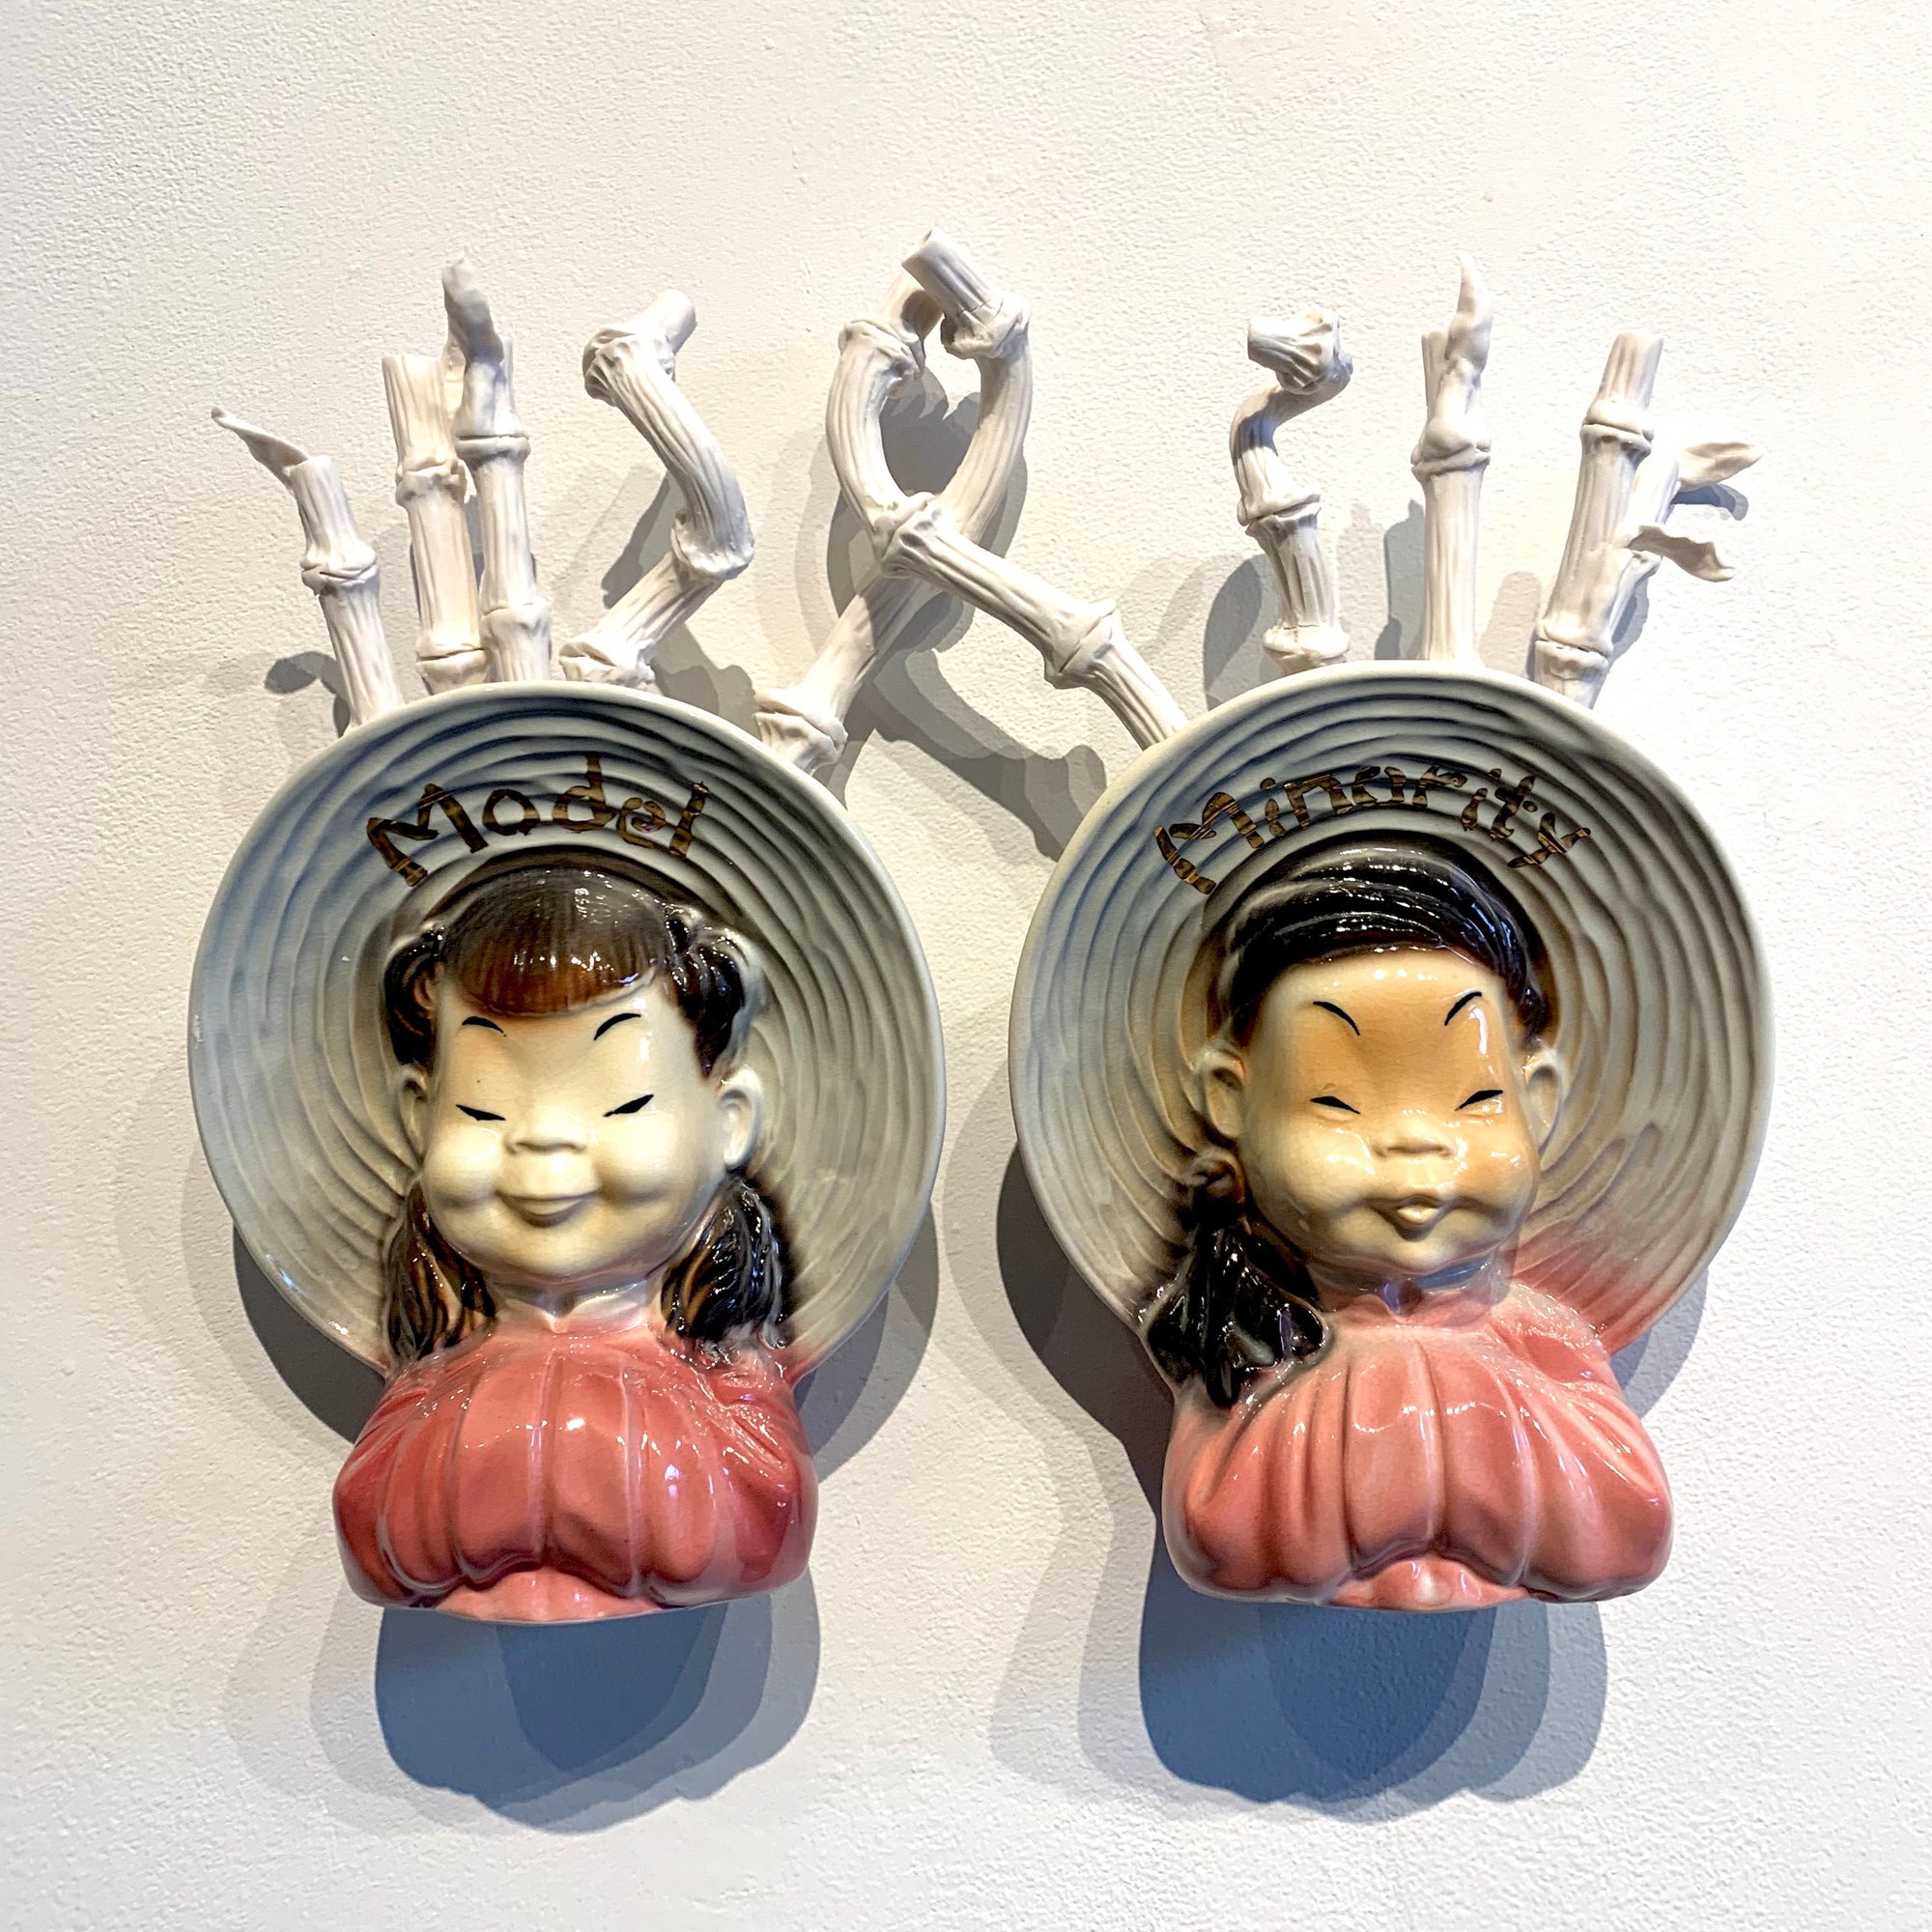 Two porcelien figures of Asian women in brimmed hats. The hats read "Model" and "Minority"